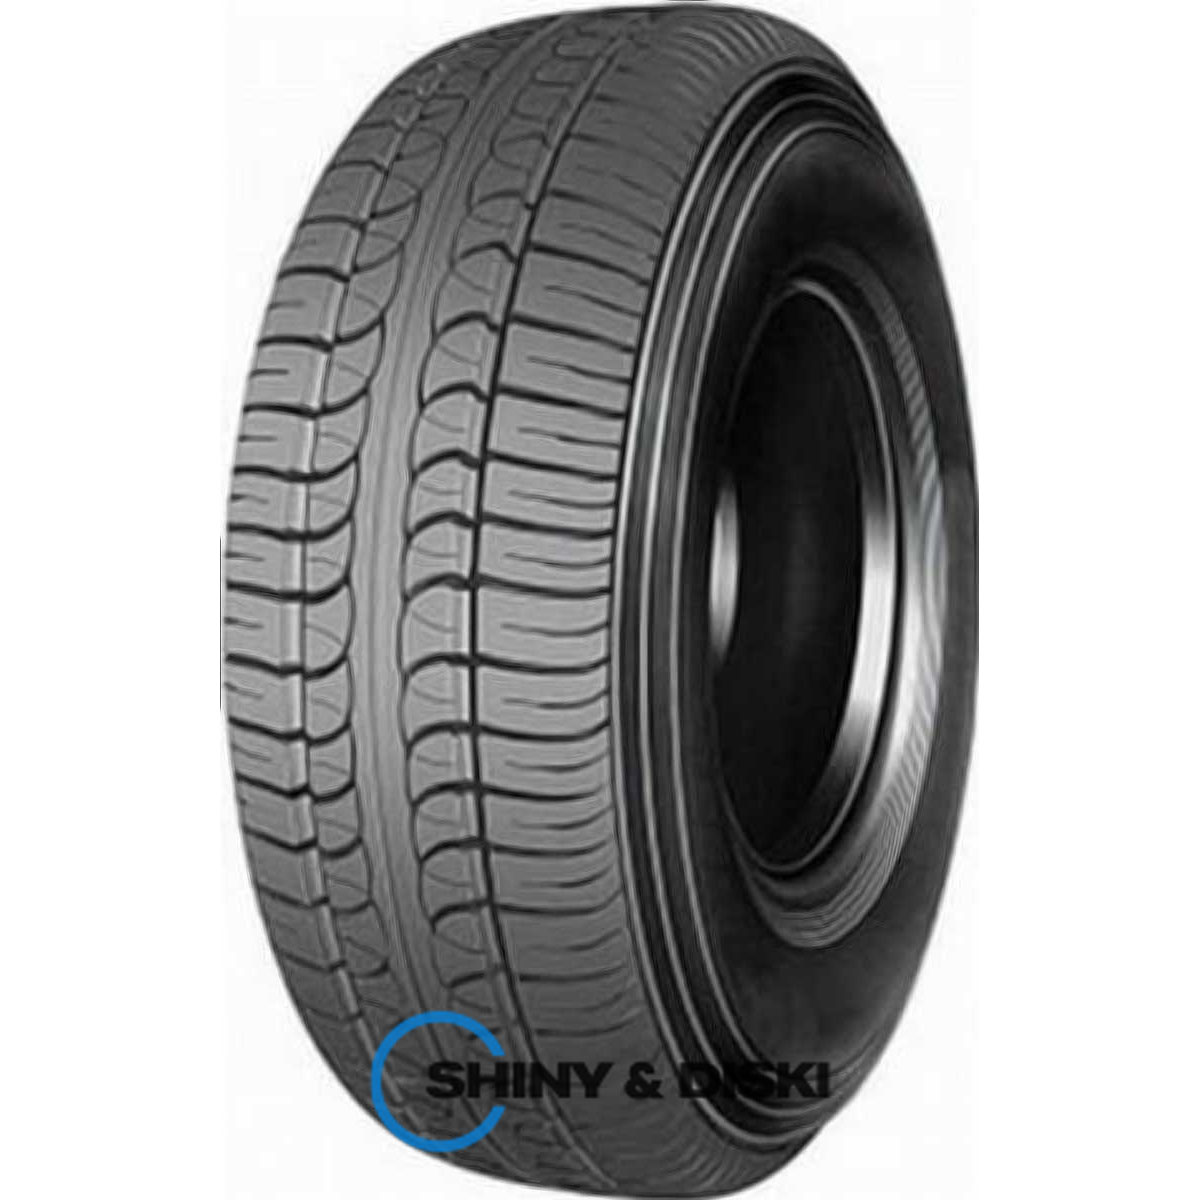 infinity inf-030 175/70 r13 82t